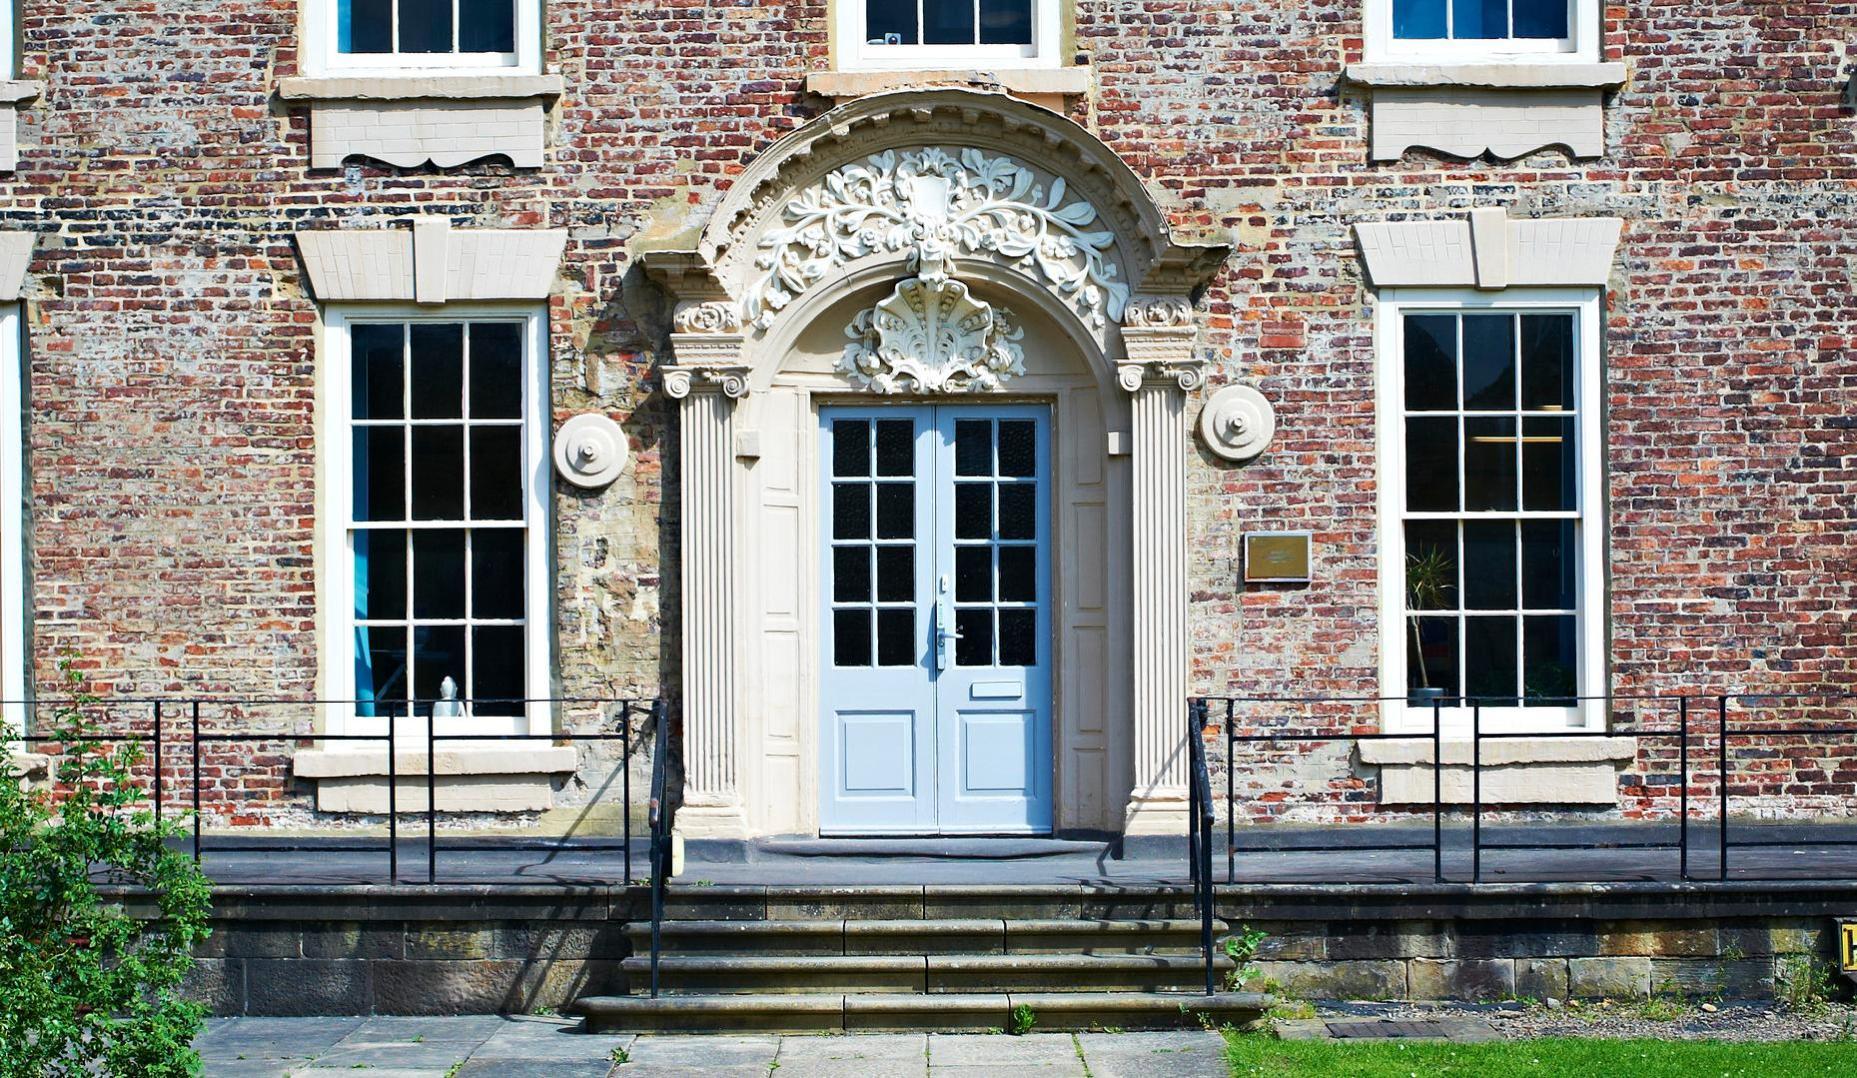 External shot of the front door leading into the institute of advanced study